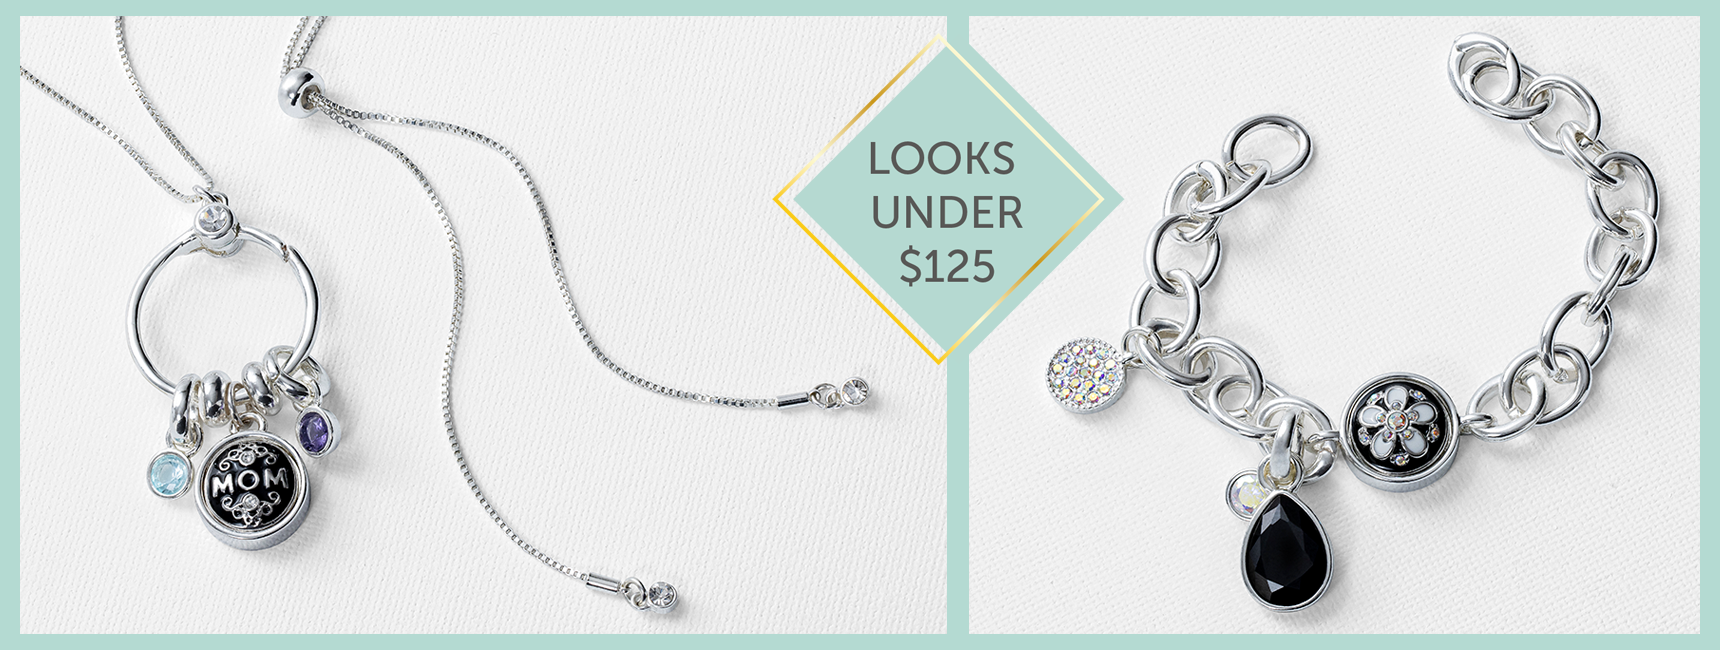 Necklaces and Bracelets with added Charms, Accents, Teardrops and Dots create looks under one hundred twenty-five dollars.